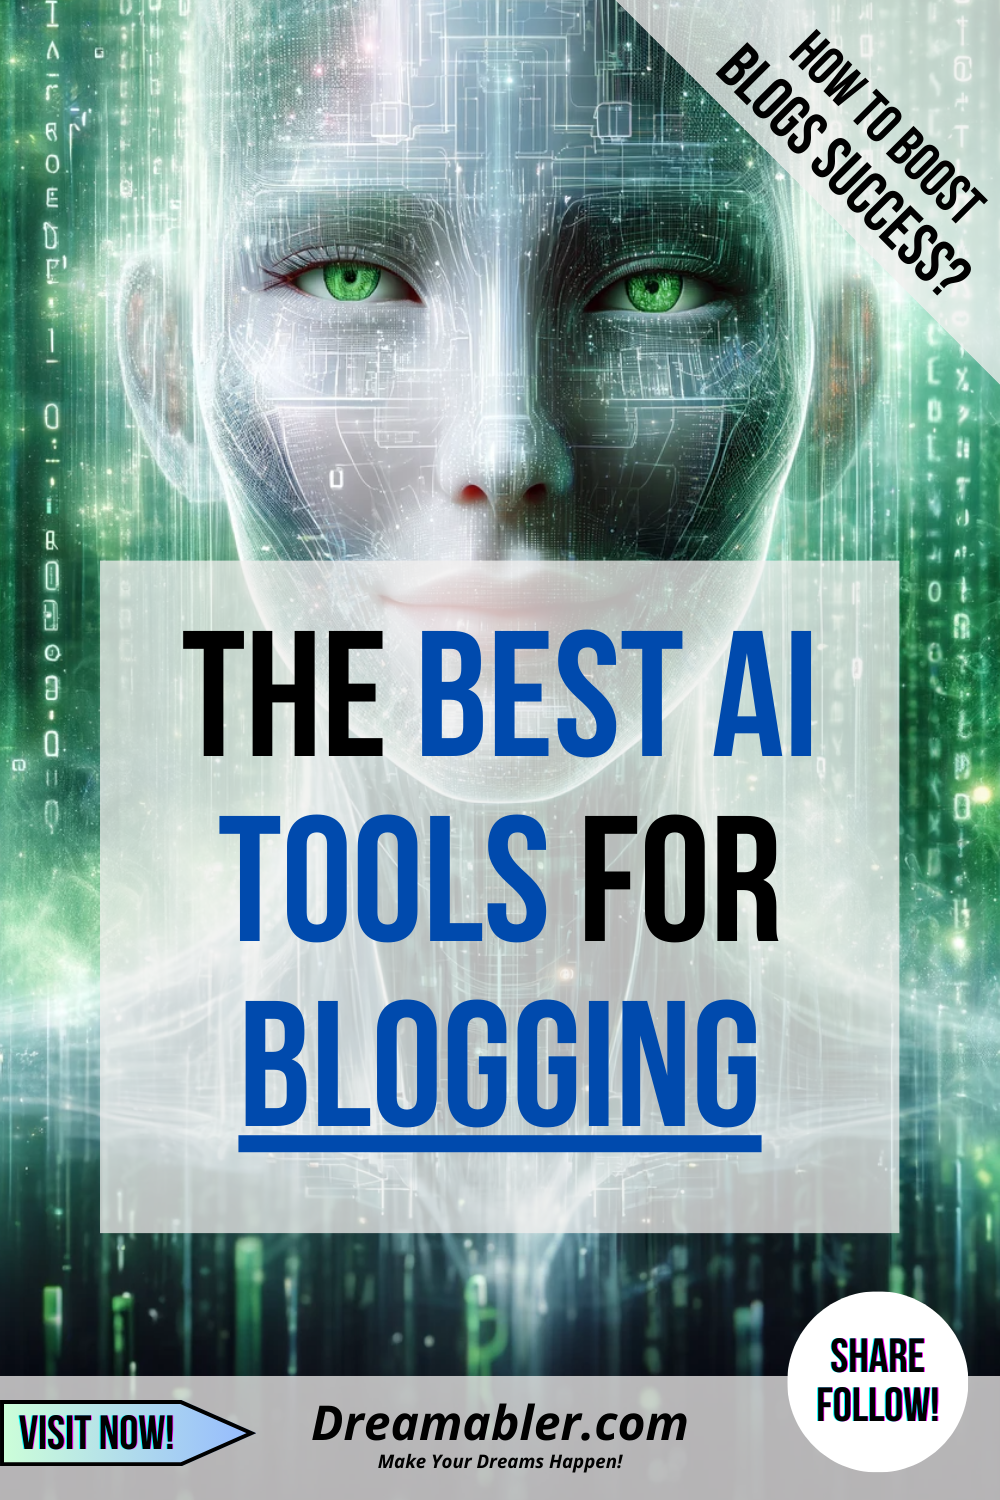 Best AI Tools App For Blogging - how to boost blogs success - artificial intelligence illustration - Dreamabler-com